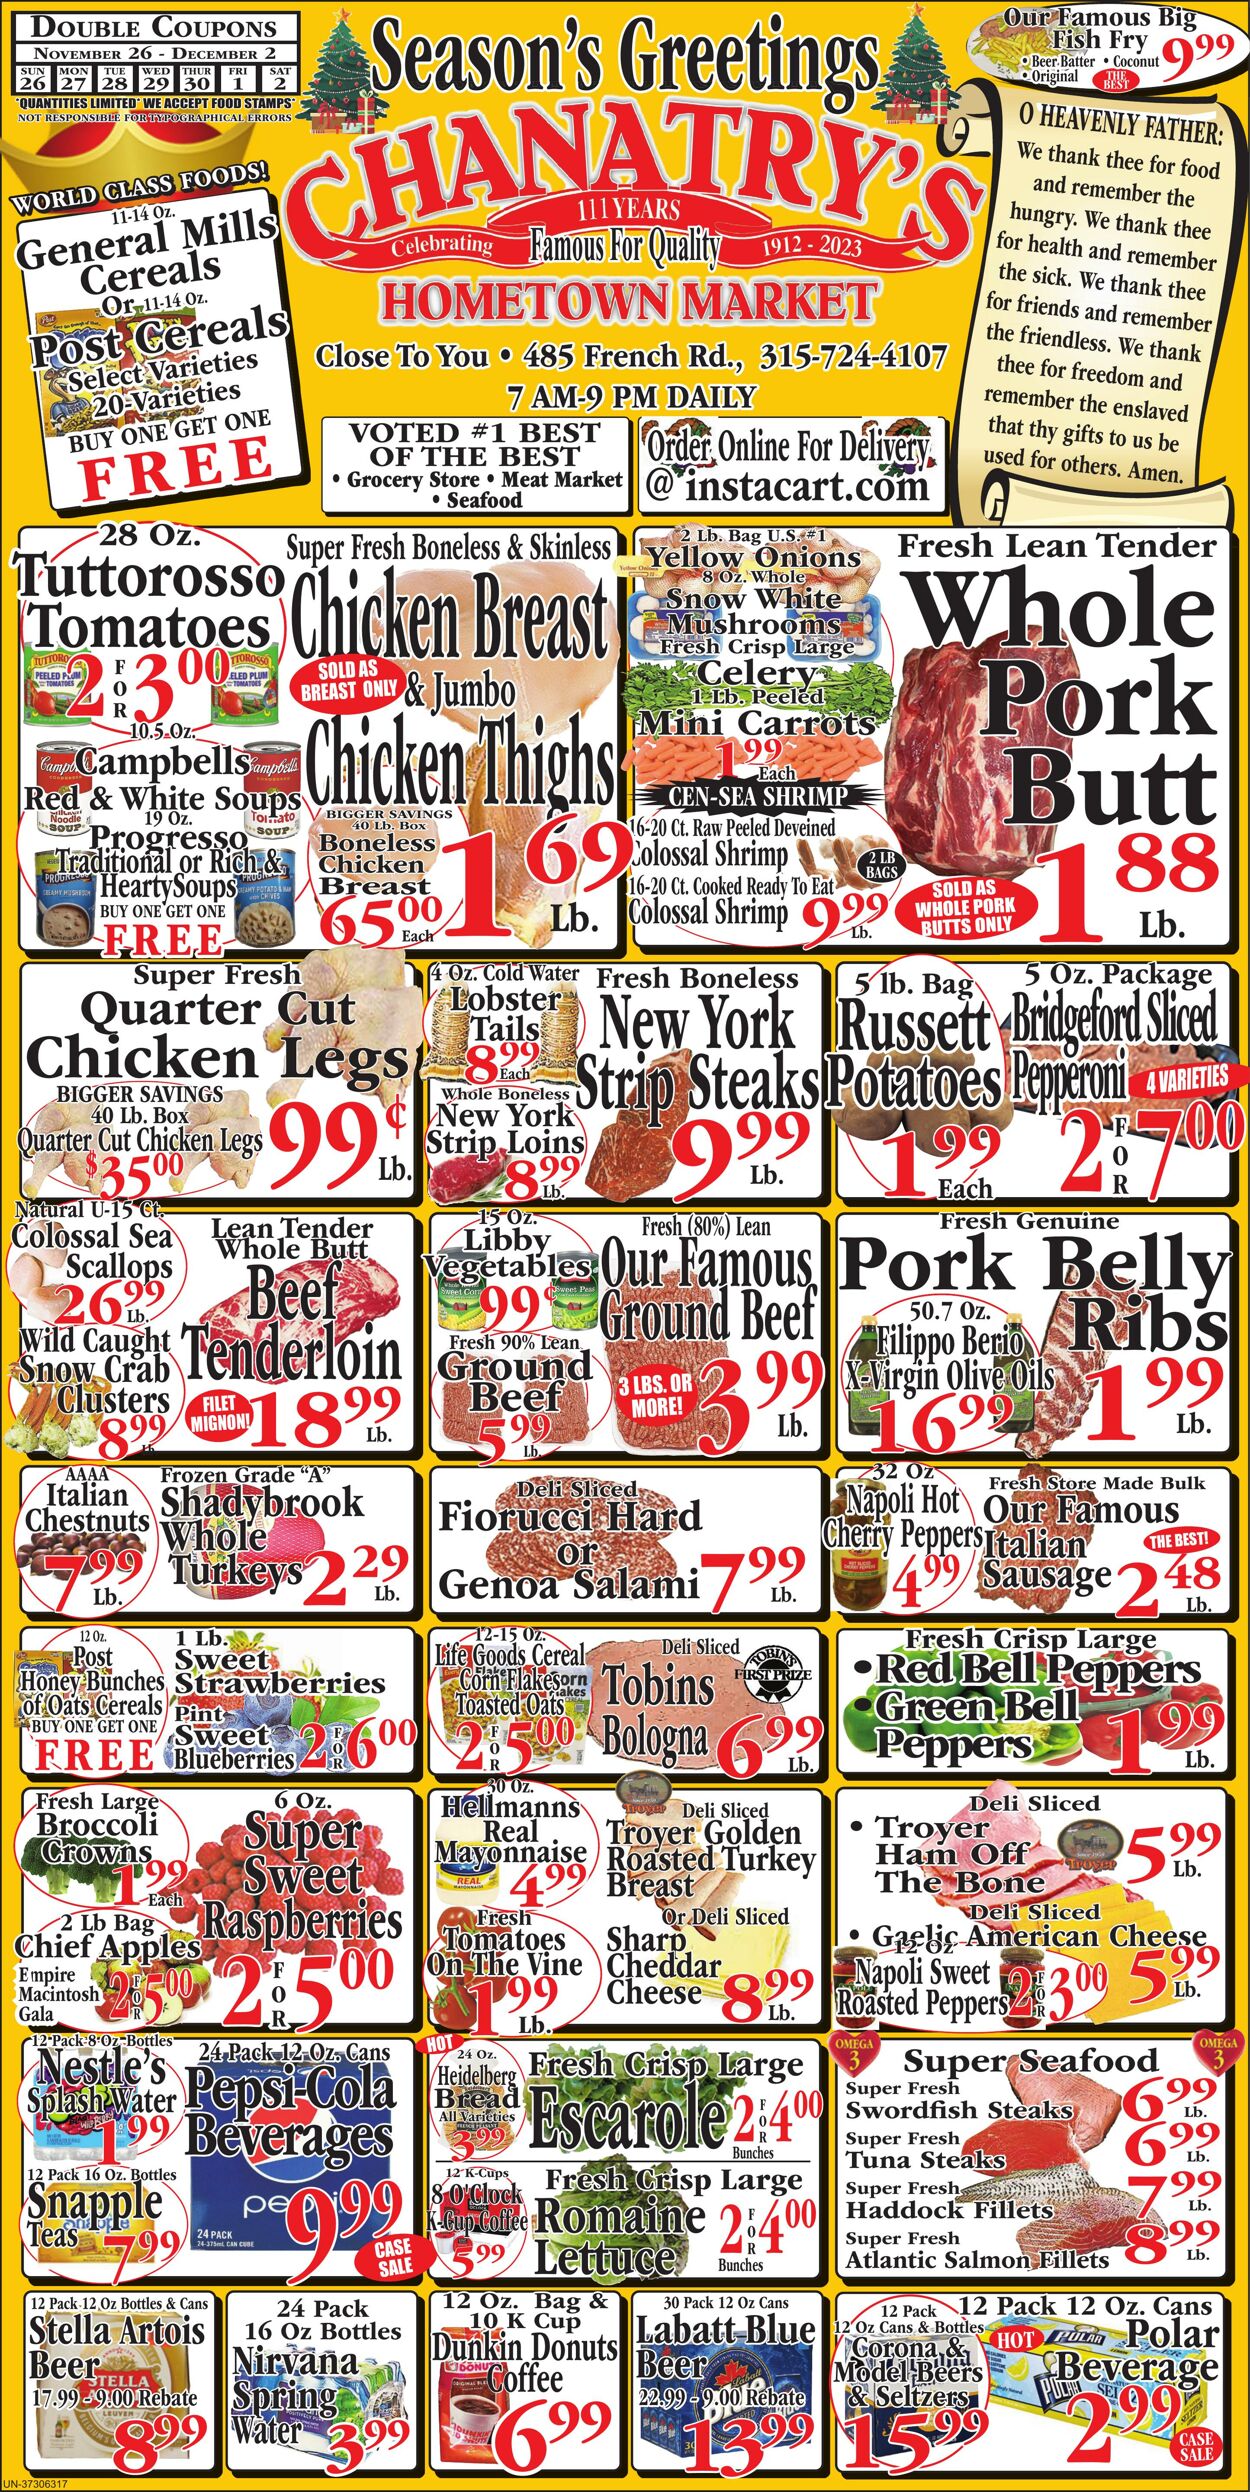 Chanatry's Hometown Market Promotional weekly ads